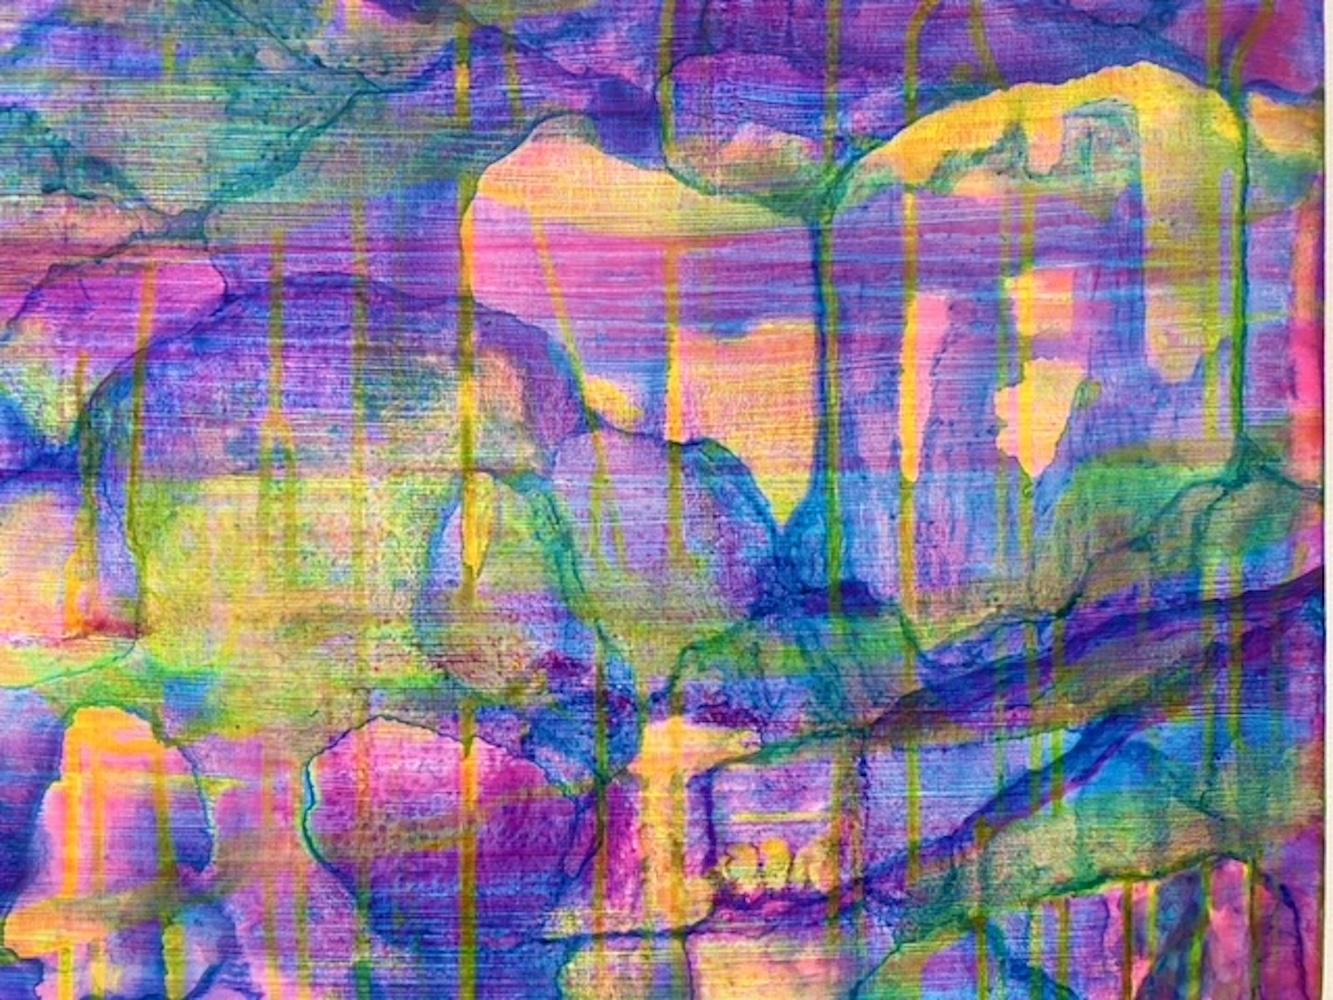 Canyon, vibrant landscape painting, neon pink and purple 1